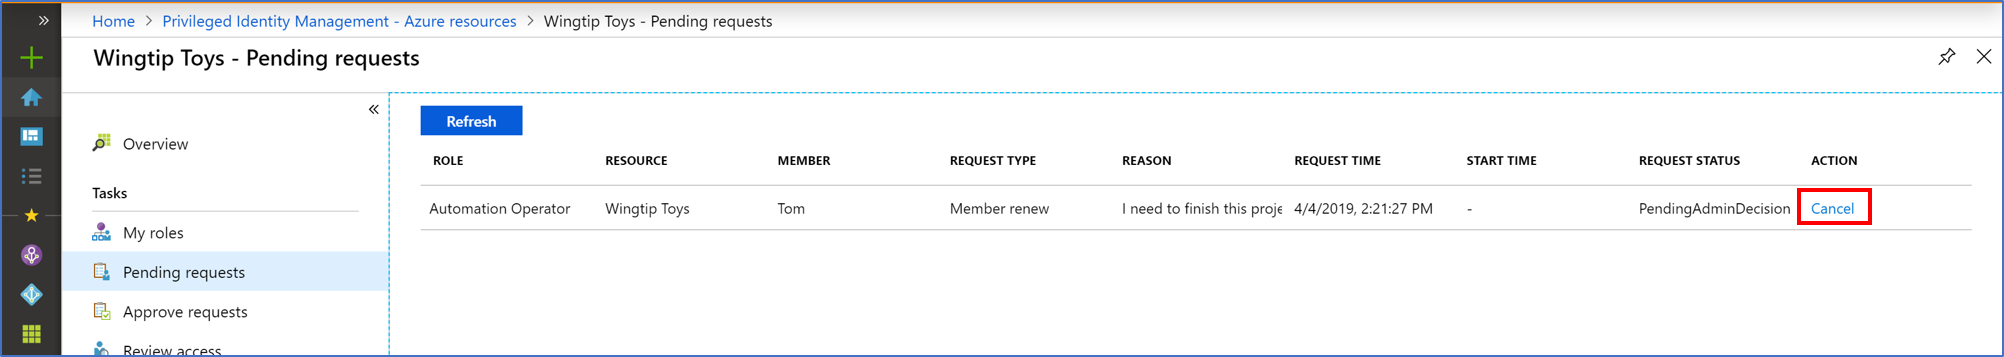 Azure resources - Pending requests page listing any pending requested and a link to Cancel